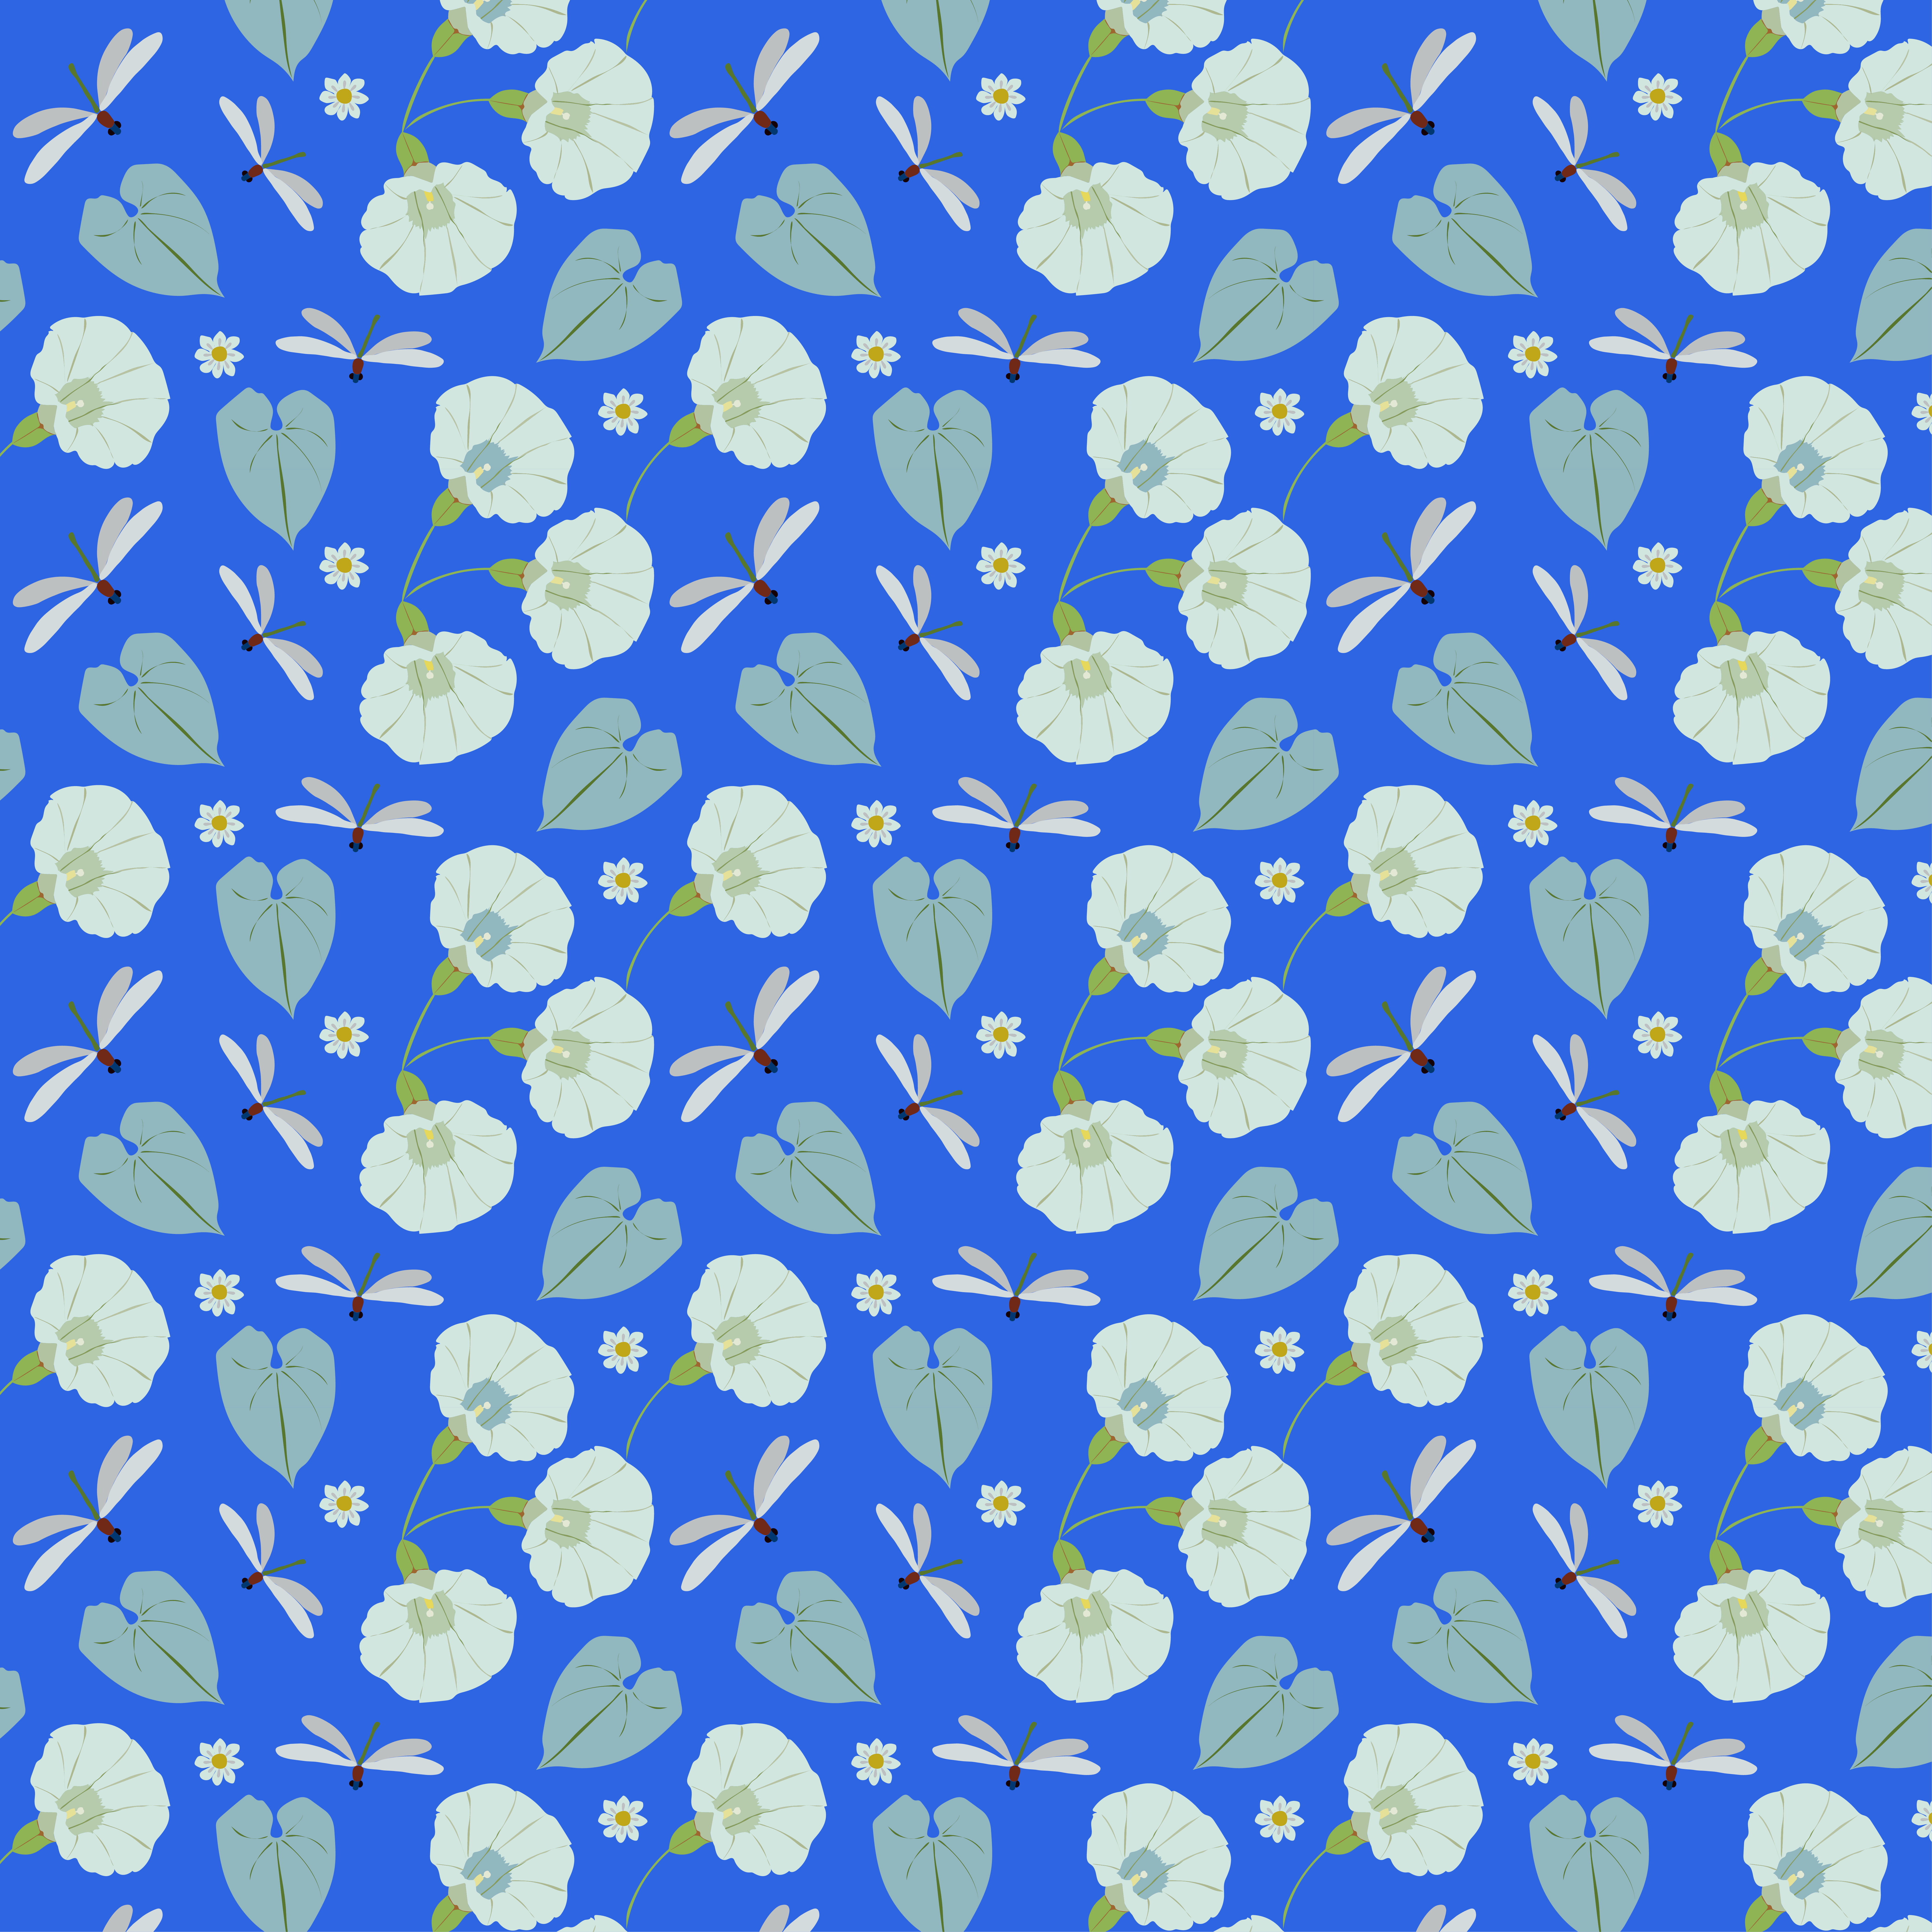 A pattern of white bindweeds and dragonflies 1